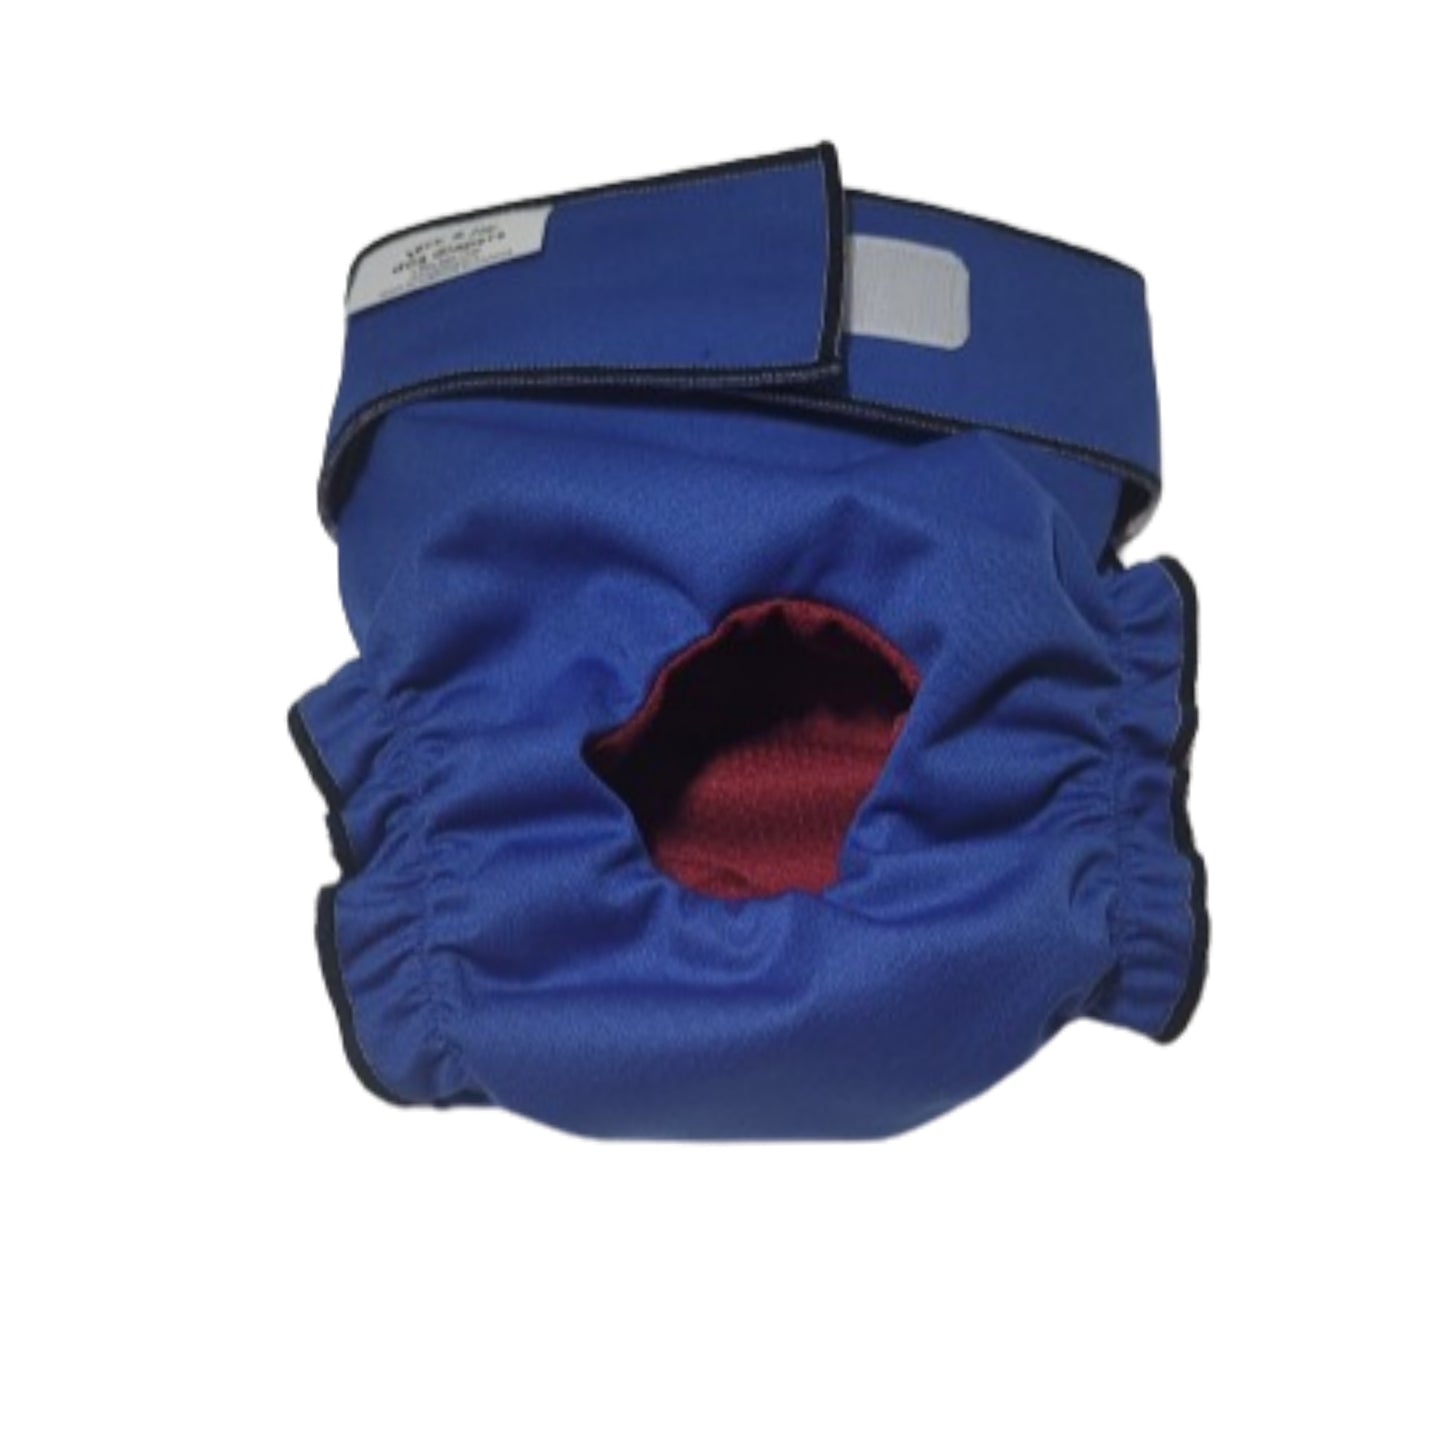 Female Dog Diaper  Britches - With Tail Opening-Royal Blue